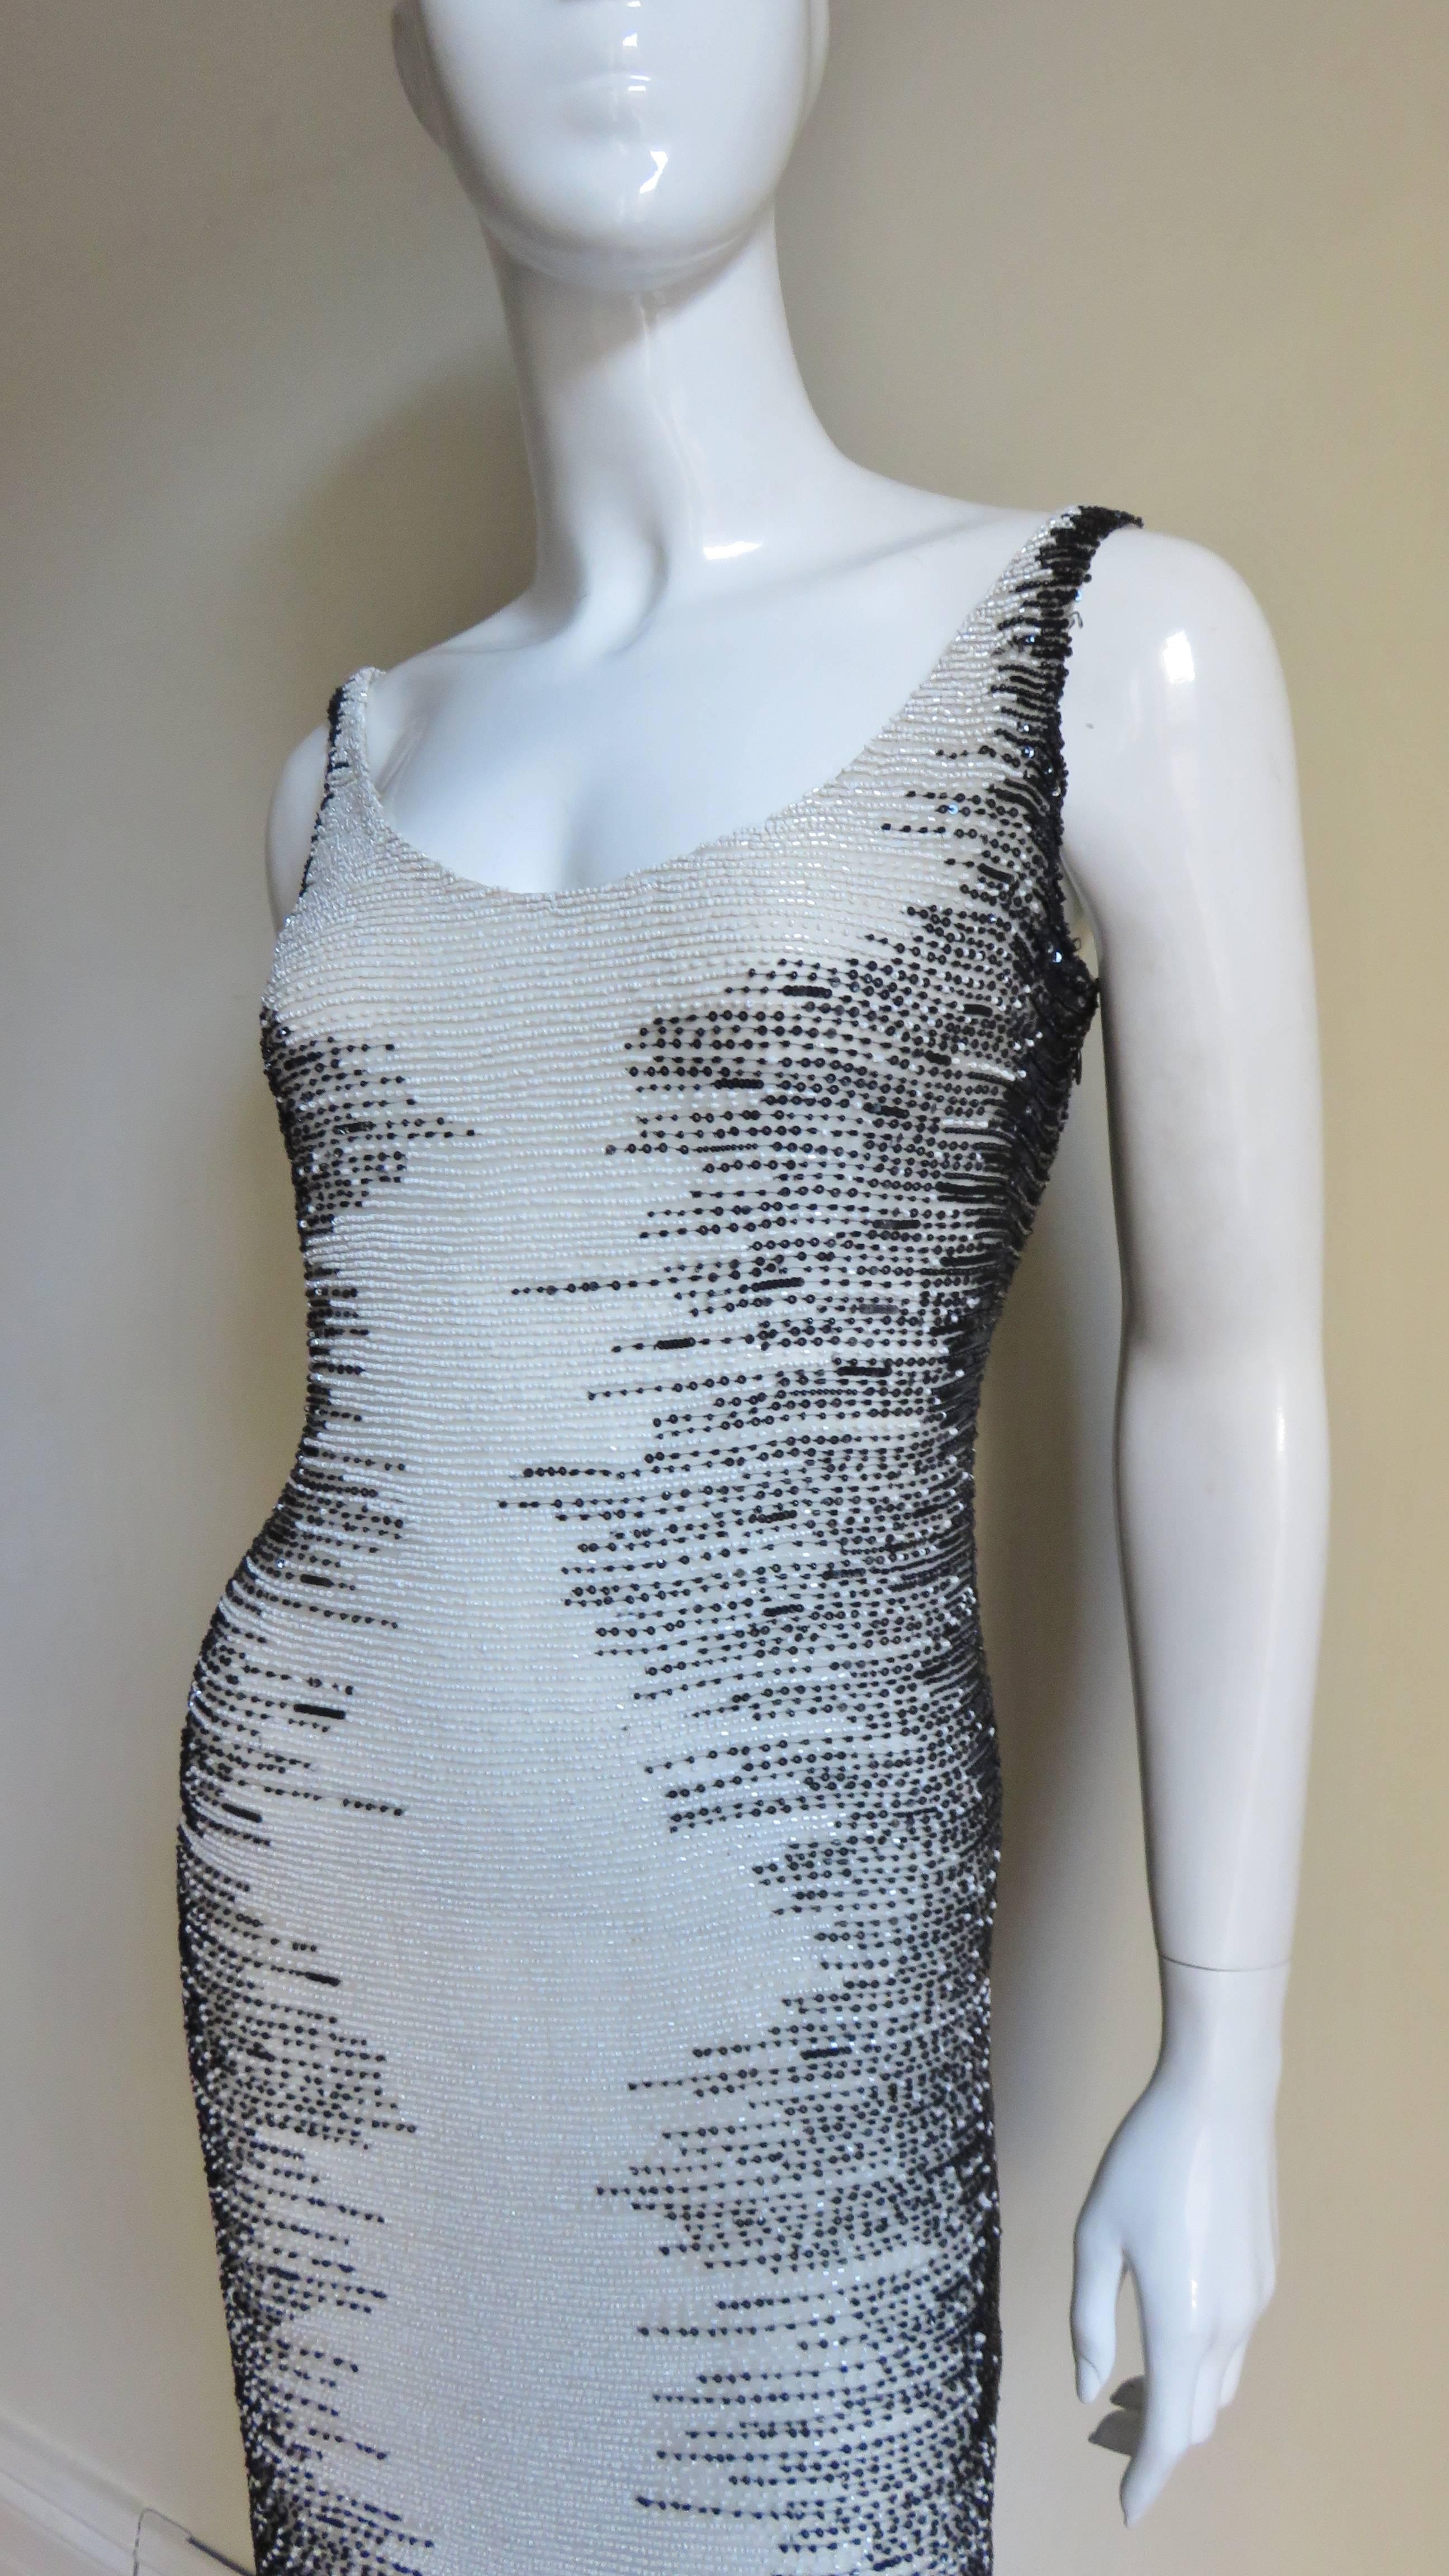 Women's 1990s Valentino Boutique Black and White Beaded Dress